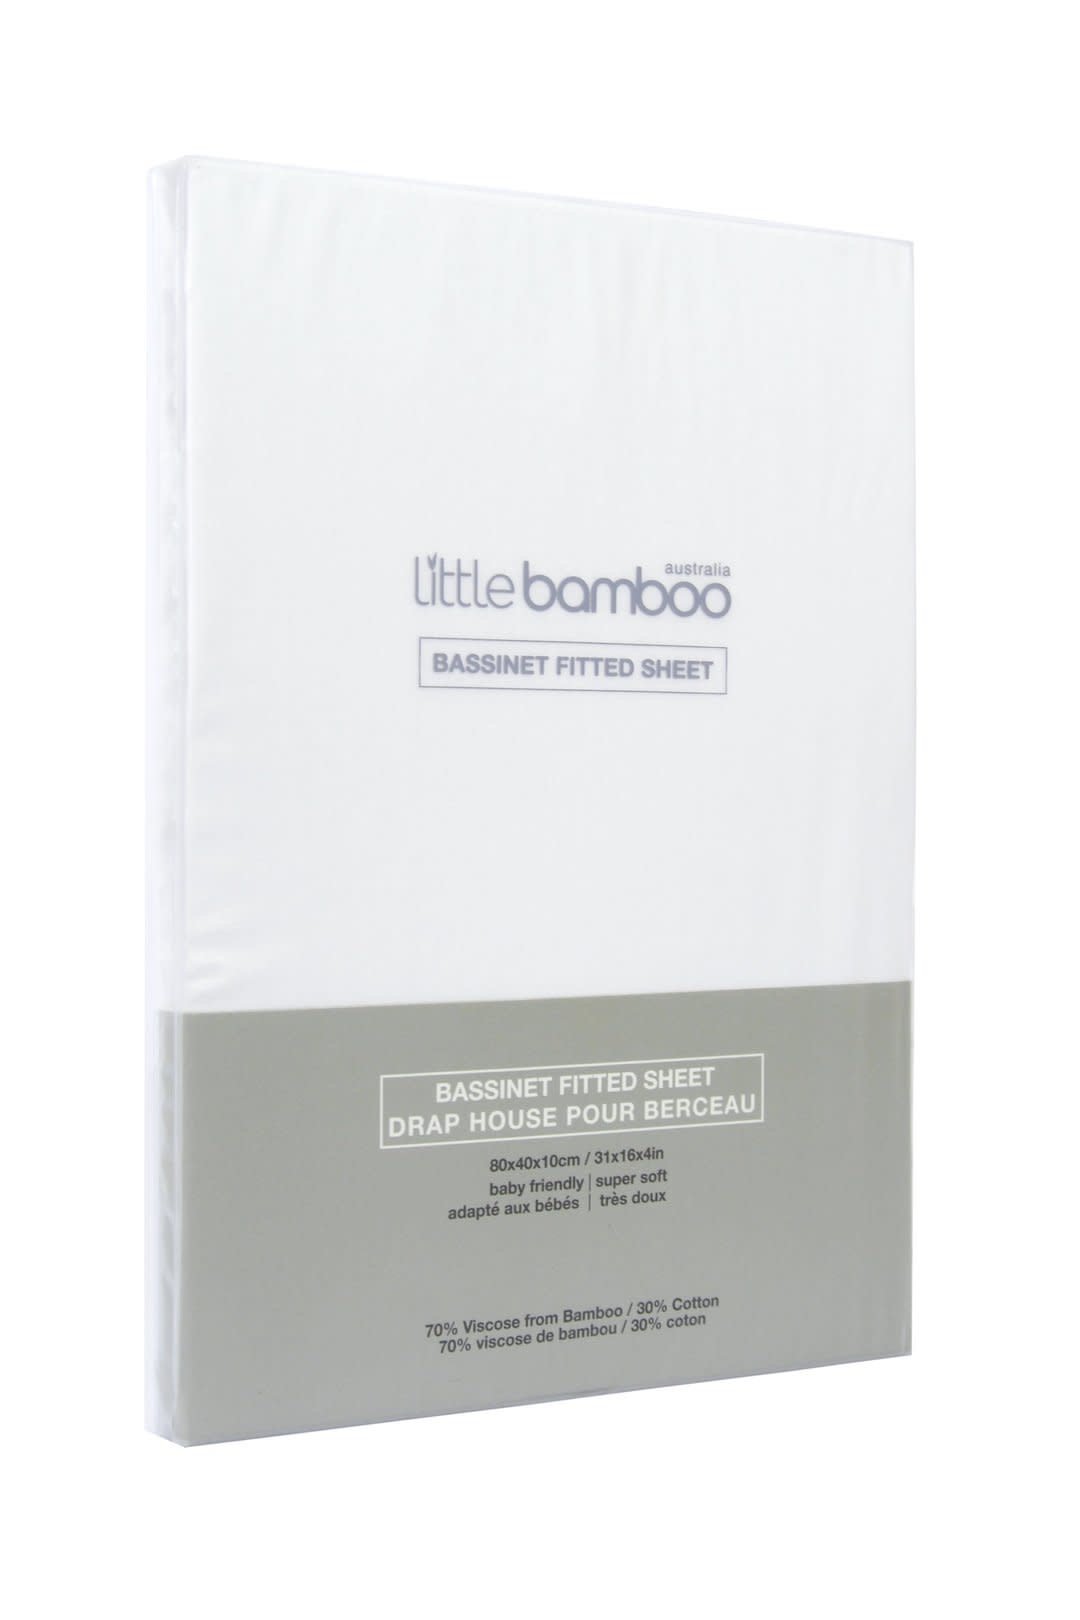 Little Bamboo Little Bamboo Bassinet Fitted Sheets - 80x40x10cm